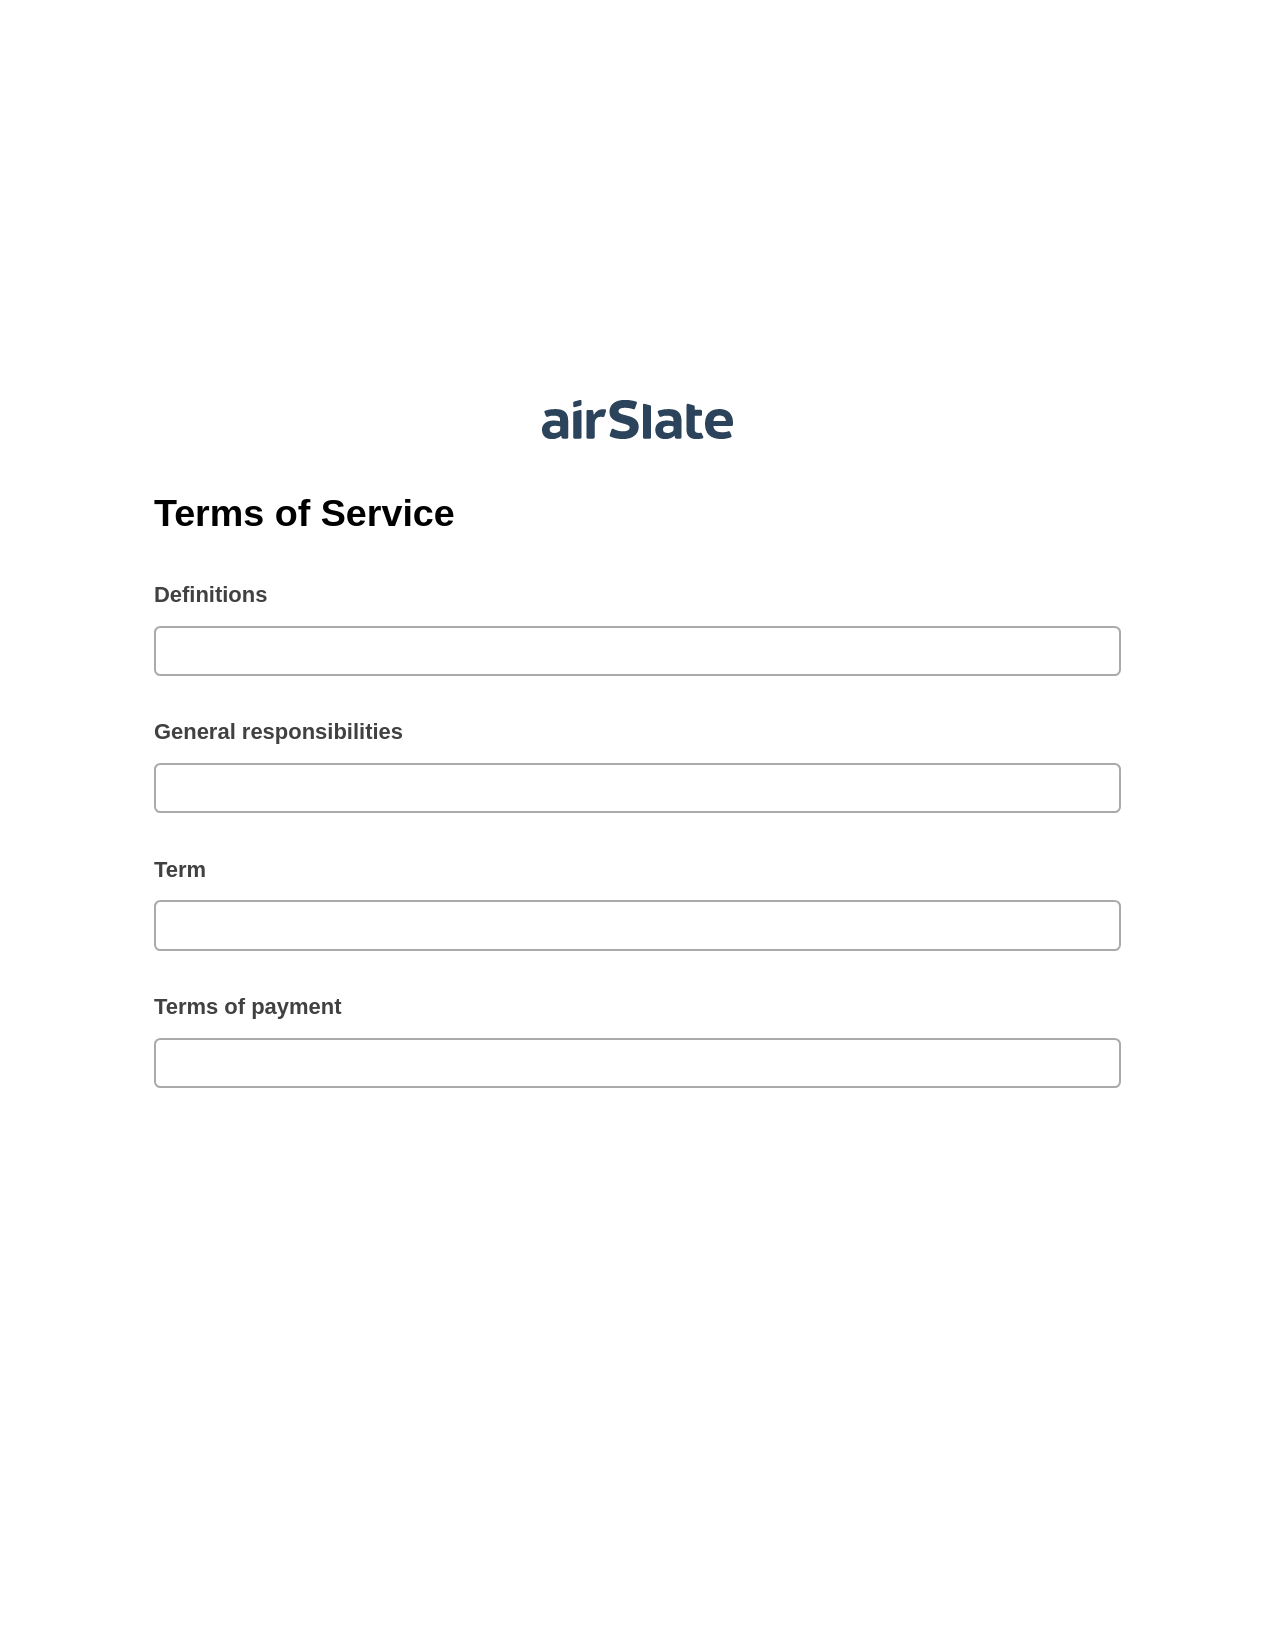 Multirole Terms of Service Pre-fill Slate from MS Dynamics 365 Records Bot, Send a Slate to Salesforce Contact Bot, Google Drive Bot